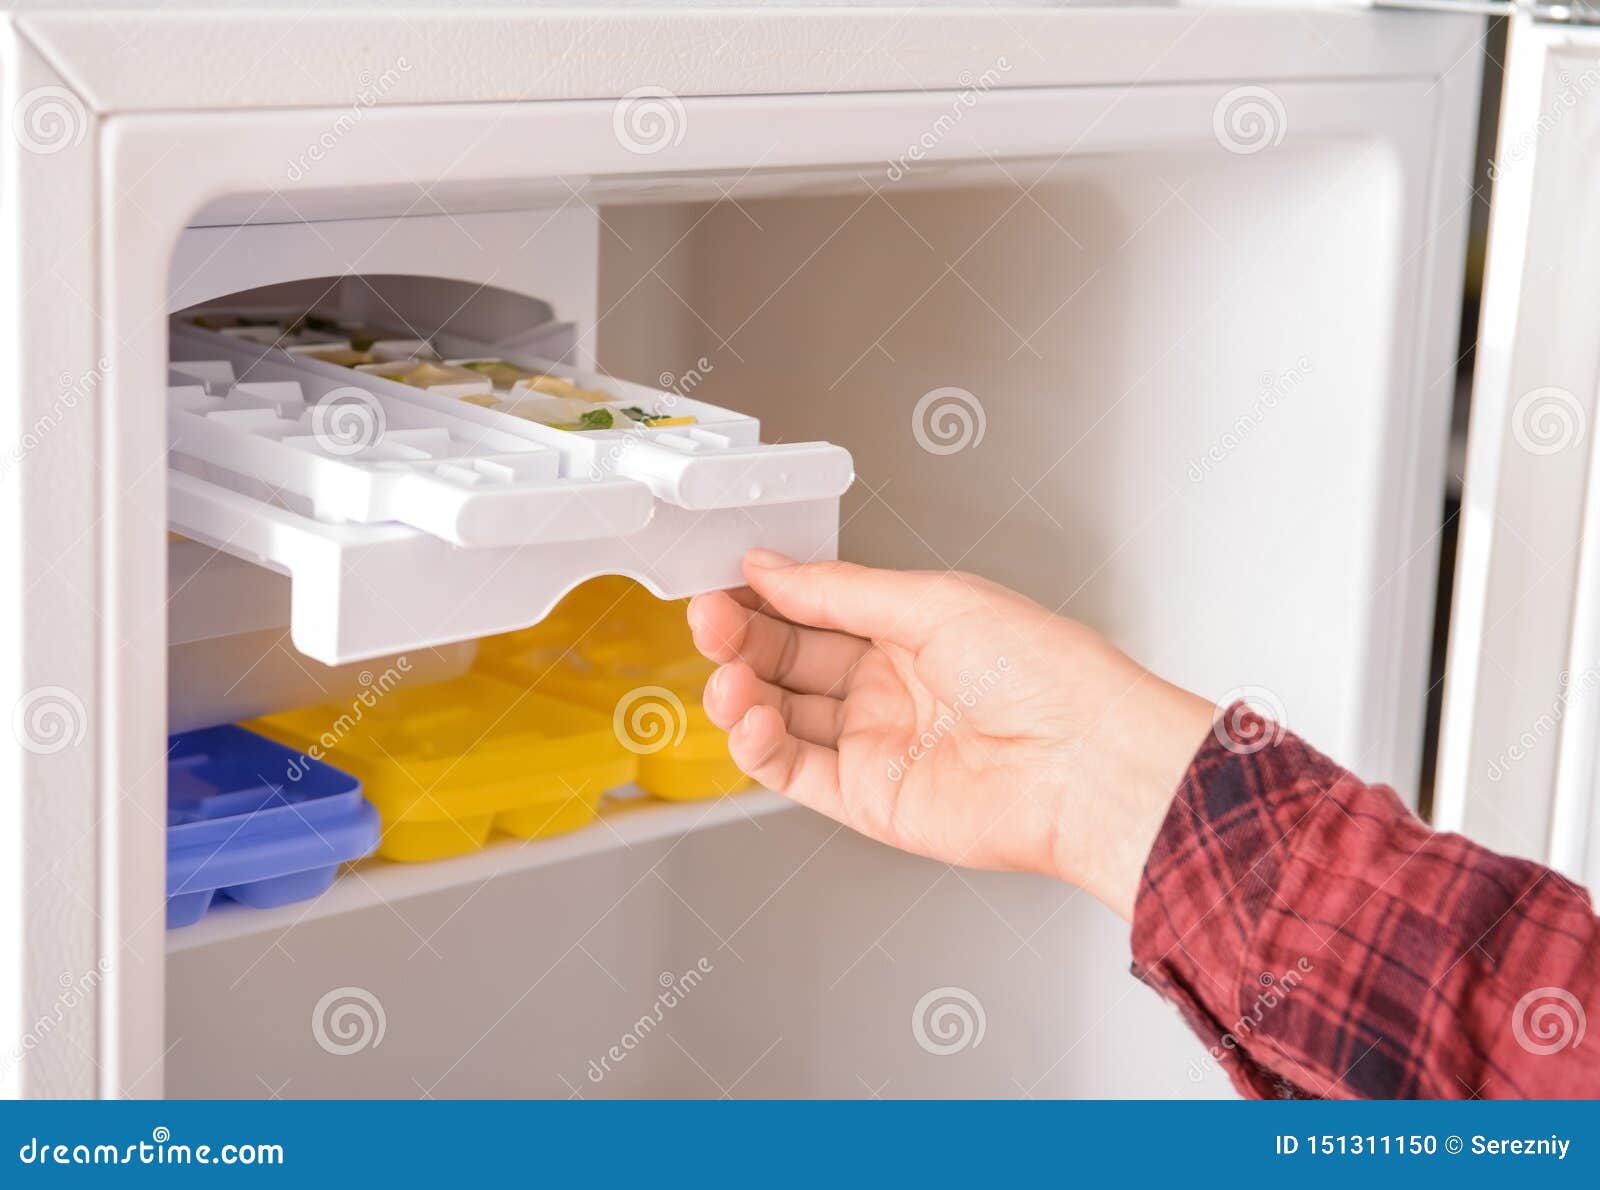 A Woman Opens an Ice Maker Tray in the Freezer To Take Ice Cubes